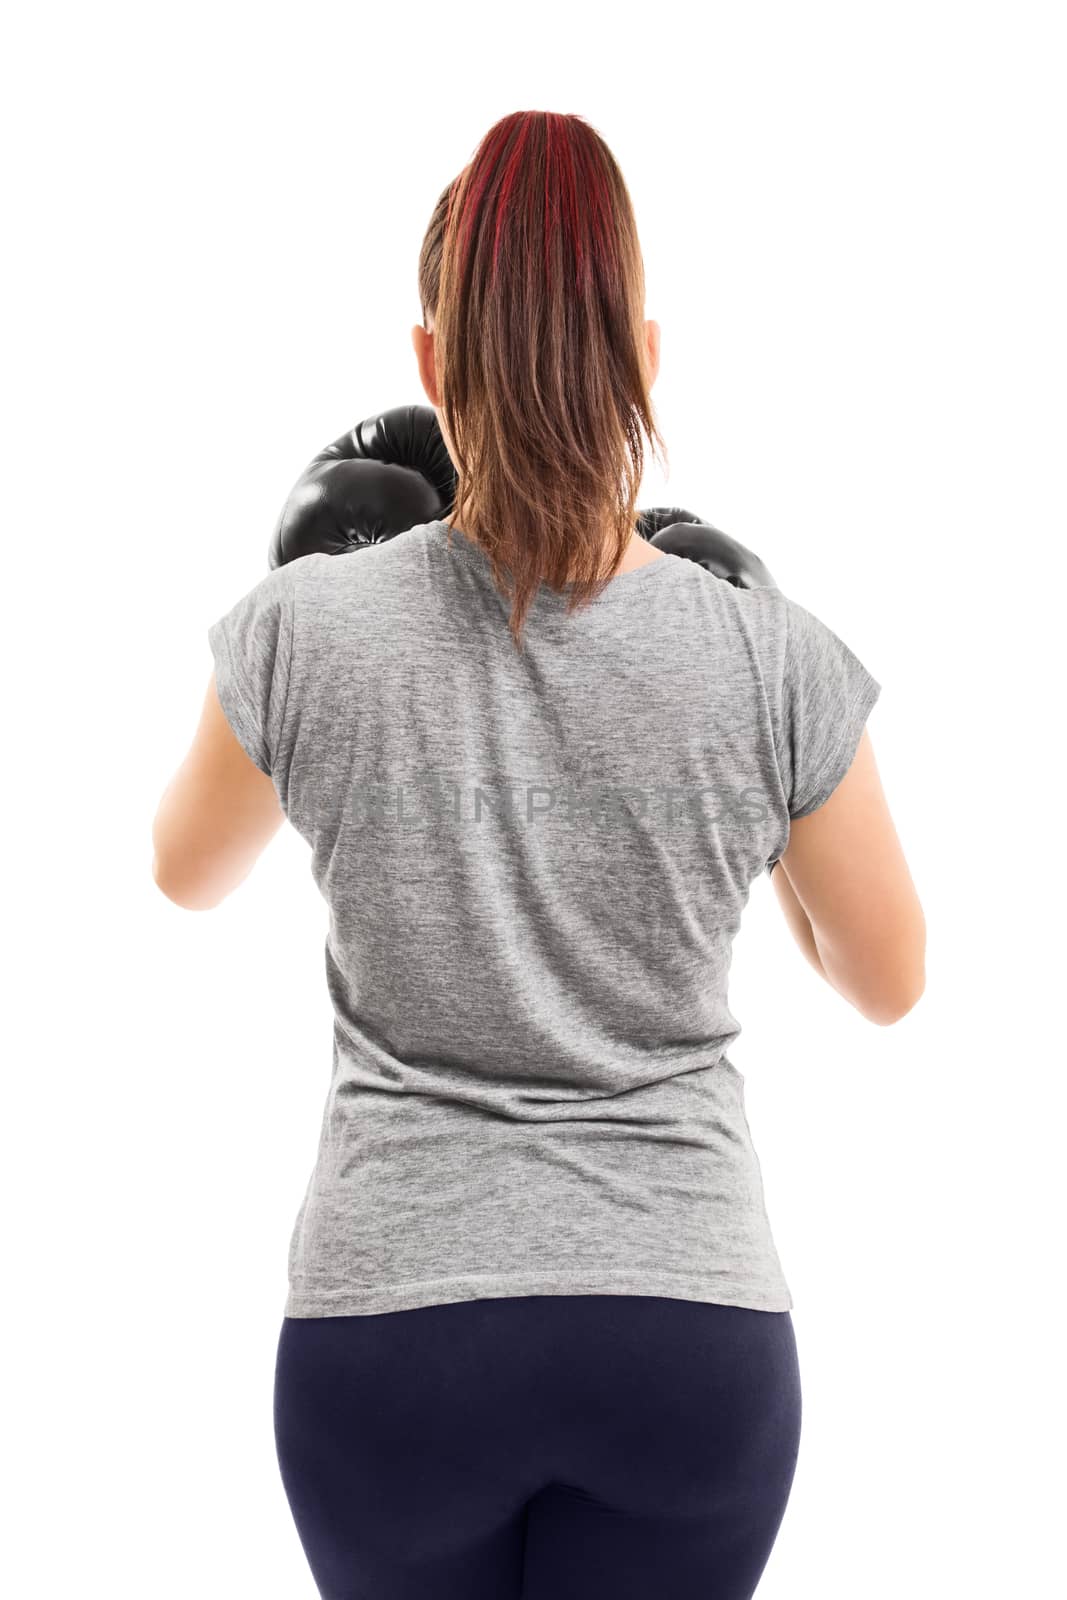 Muscular female boxer with her guard up, photographed from behind, isolated on a white background.